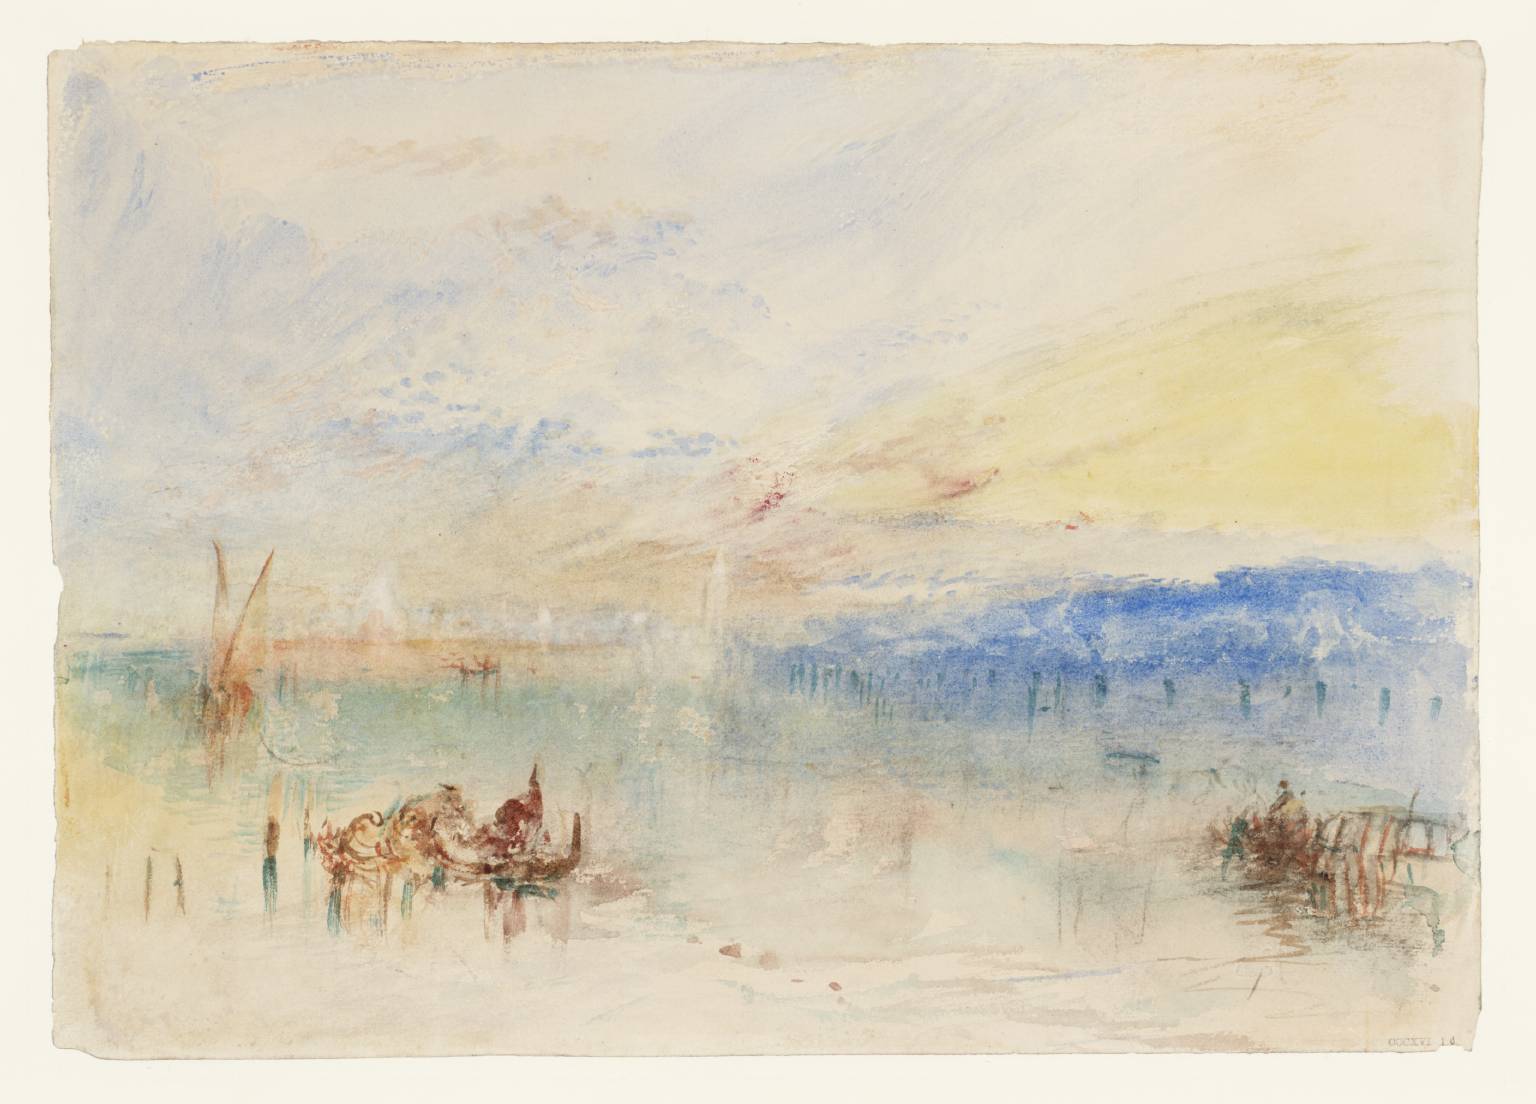 The Approach to Venice 1840 Joseph Mallord William Turner 1775-1851 Accepted by the nation as part of the Turner Bequest 1856 http://www.tate.org.uk/art/work/D32153